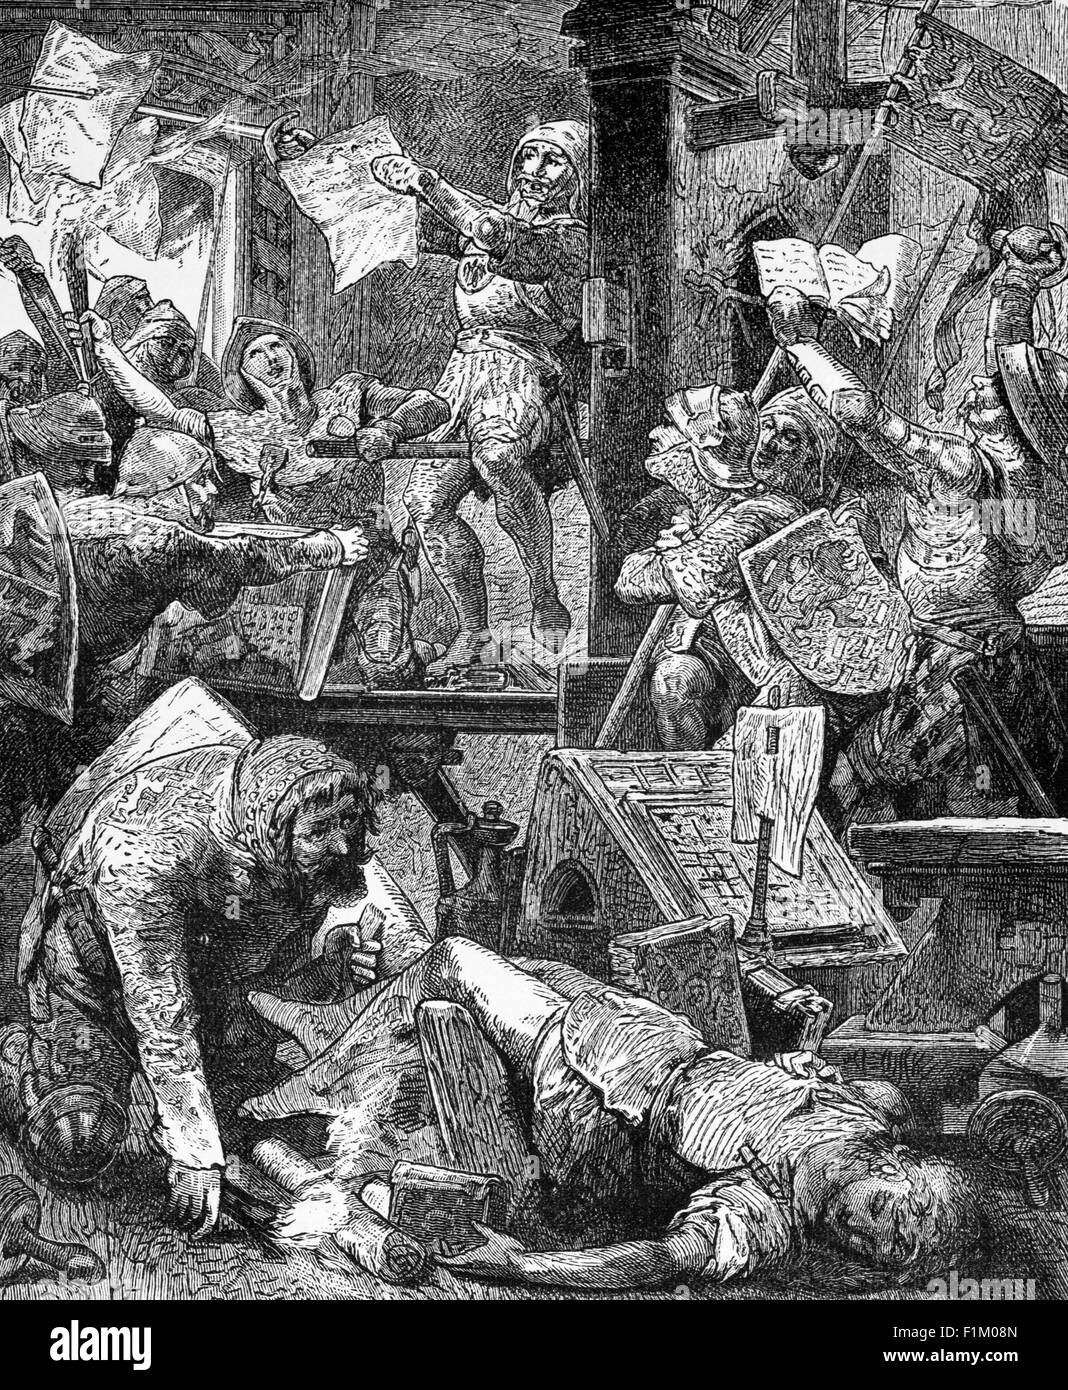 Destruction of printing presses during the Reformation in Germany. The Reformation, also called Protestant Reformation, was a religious revolution that took place in the Western church in the 16th century. Its greatest leaders undoubtedly were Martin Luther and John Calvin. Having far-reaching political, economic, and social effects, the Reformation became the basis for the founding of Protestantism, one of the three major branches of Christianity. Stock Photo